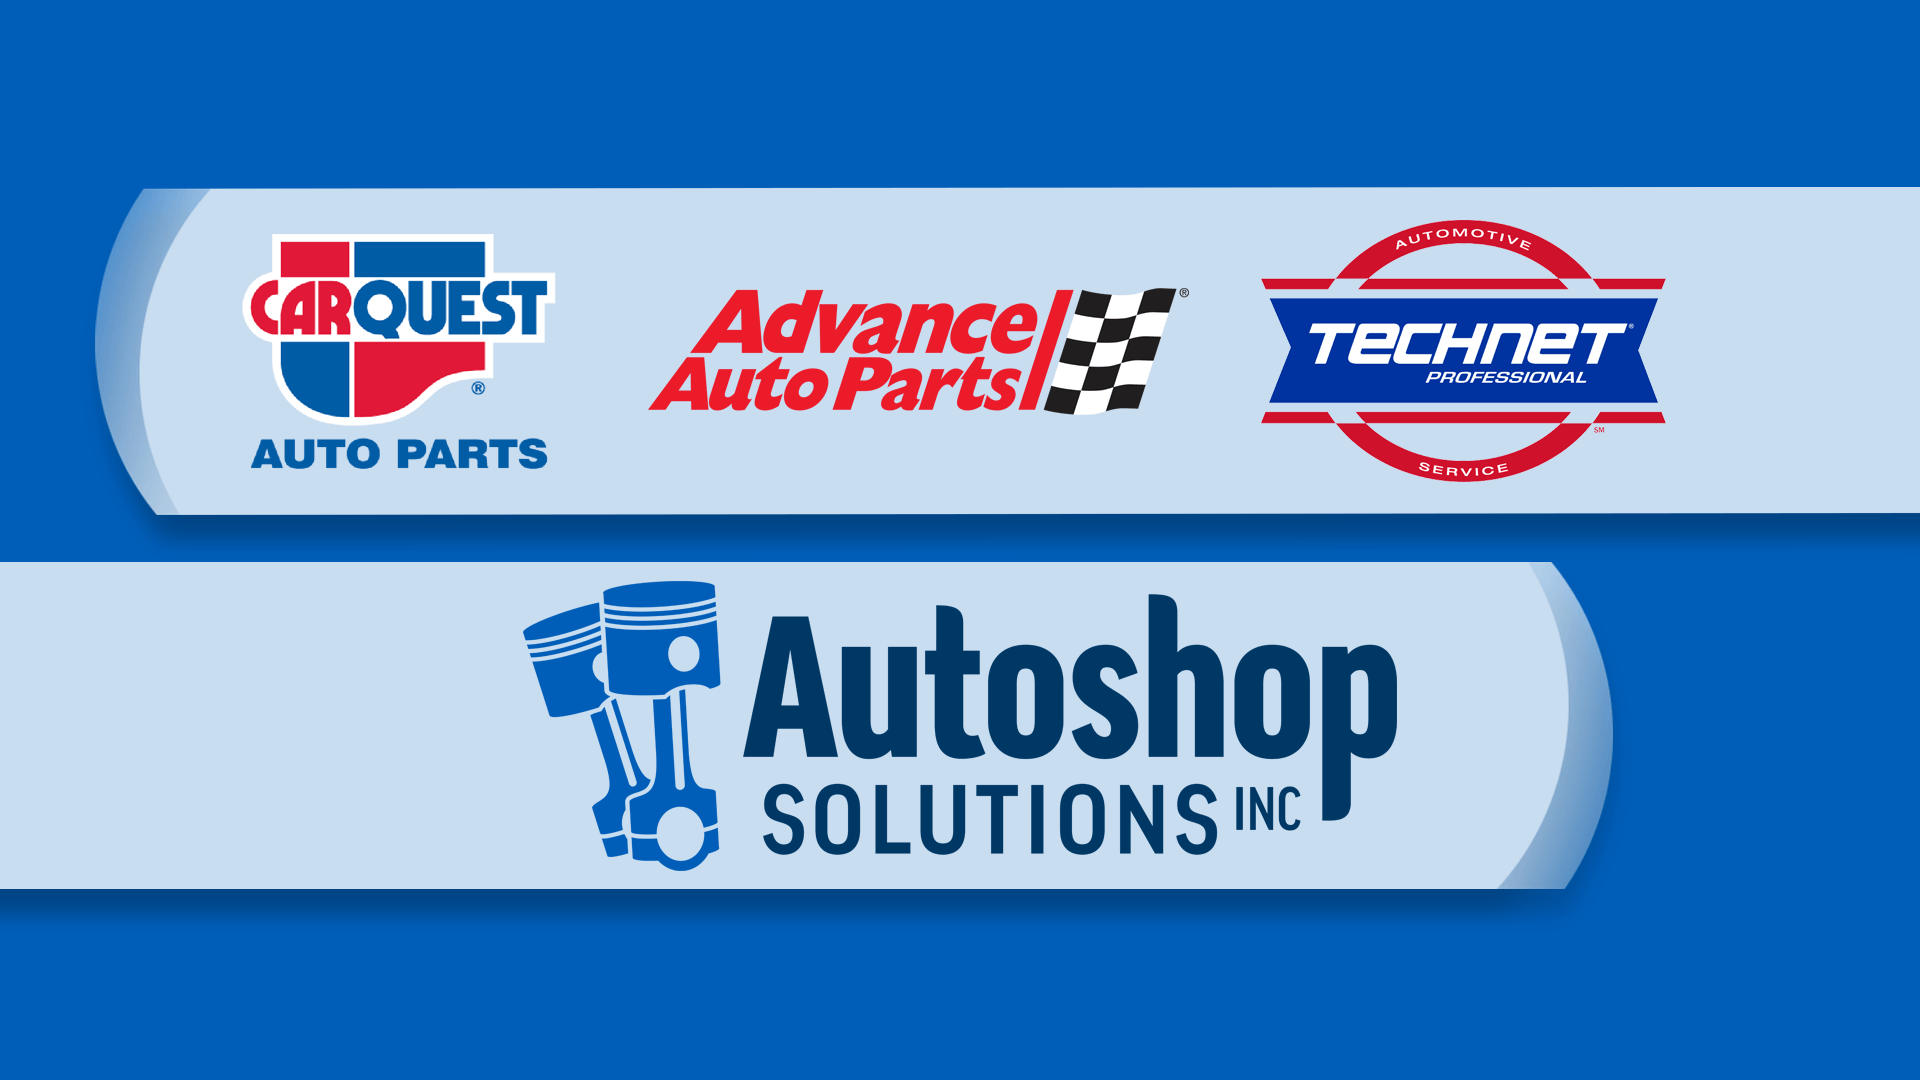 TechNet Logo - Autoshop Solutions Partners With TechNet | Industry Associations